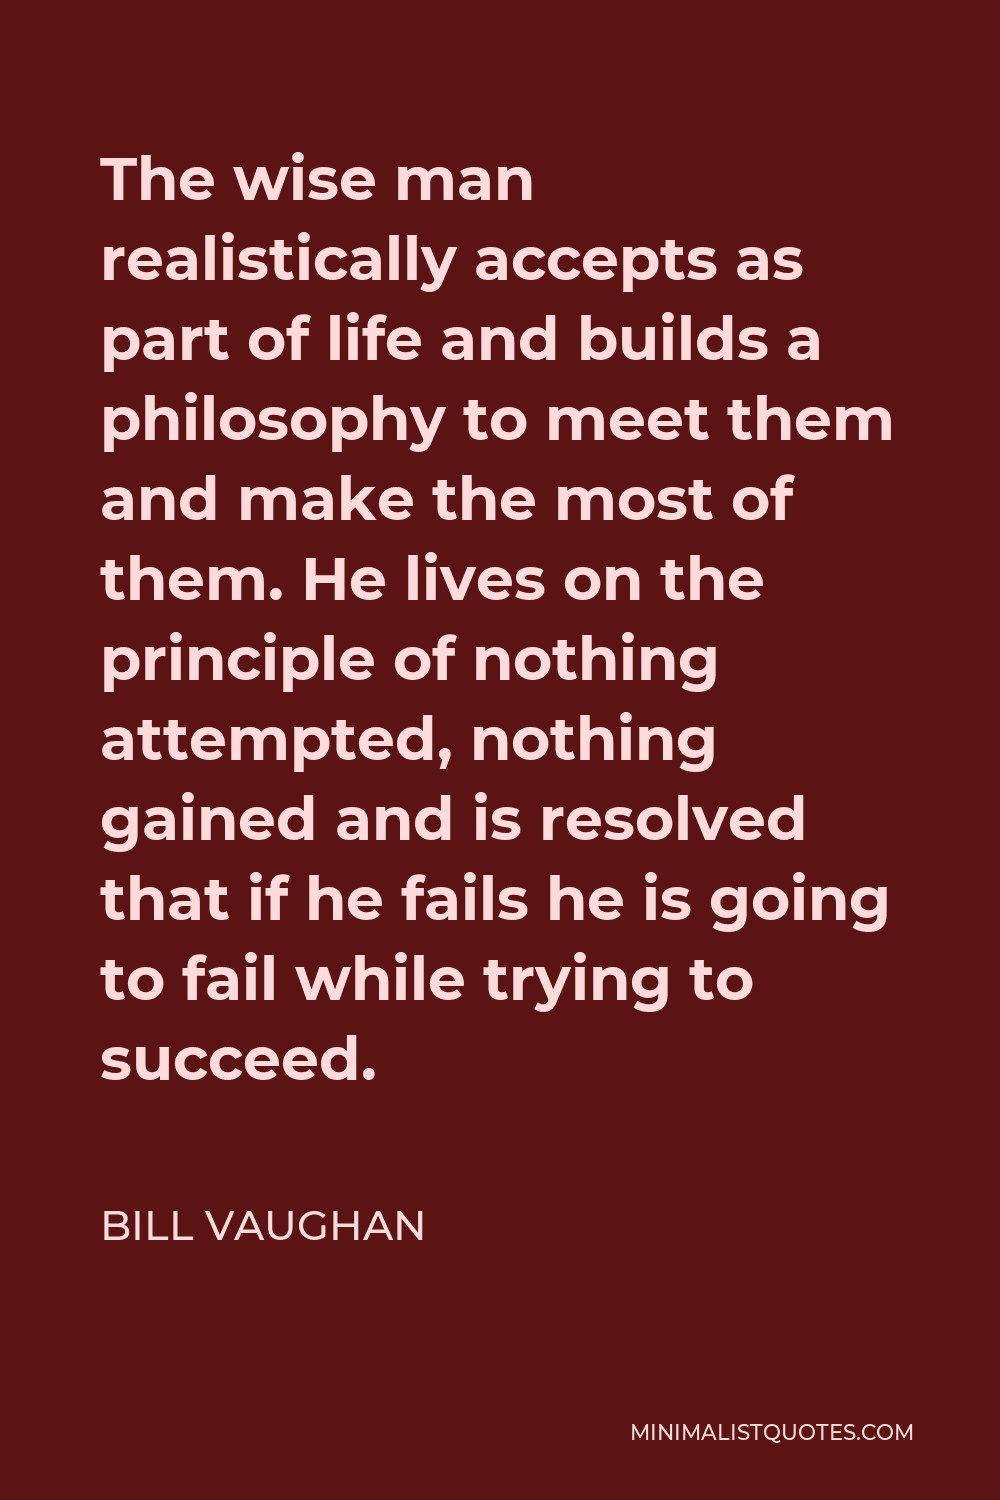 Bill Vaughan Quote - The wise man realistically accepts as part of life and builds a philosophy to meet them and make the most of them. He lives on the principle of nothing attempted, nothing gained and is resolved that if he fails he is going to fail while trying to succeed.